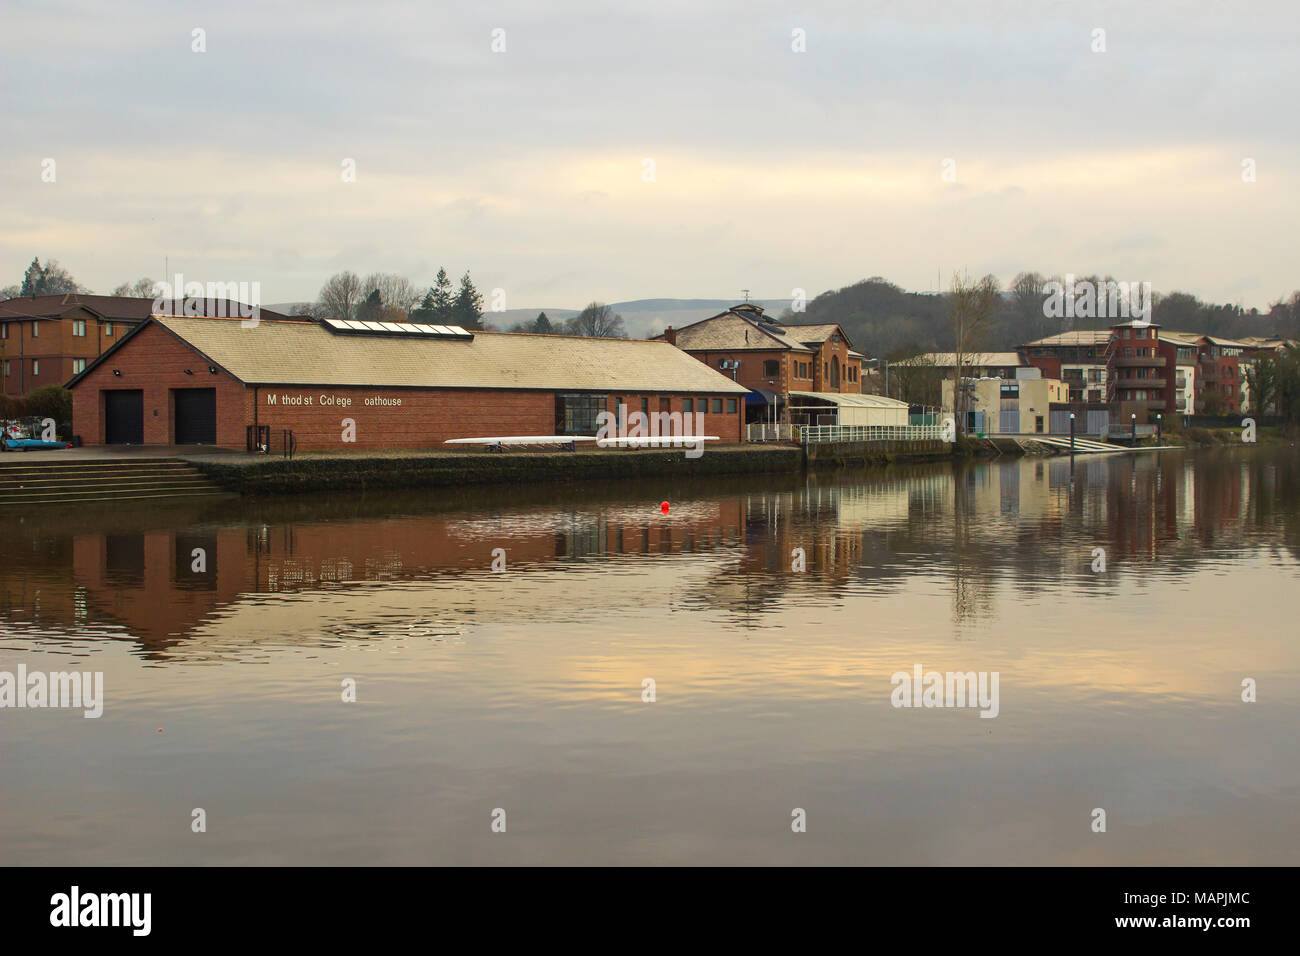 Methodist College boathouse on the calm waters of the River Lagan Northern Ireland on a cool spring evening Stock Photo